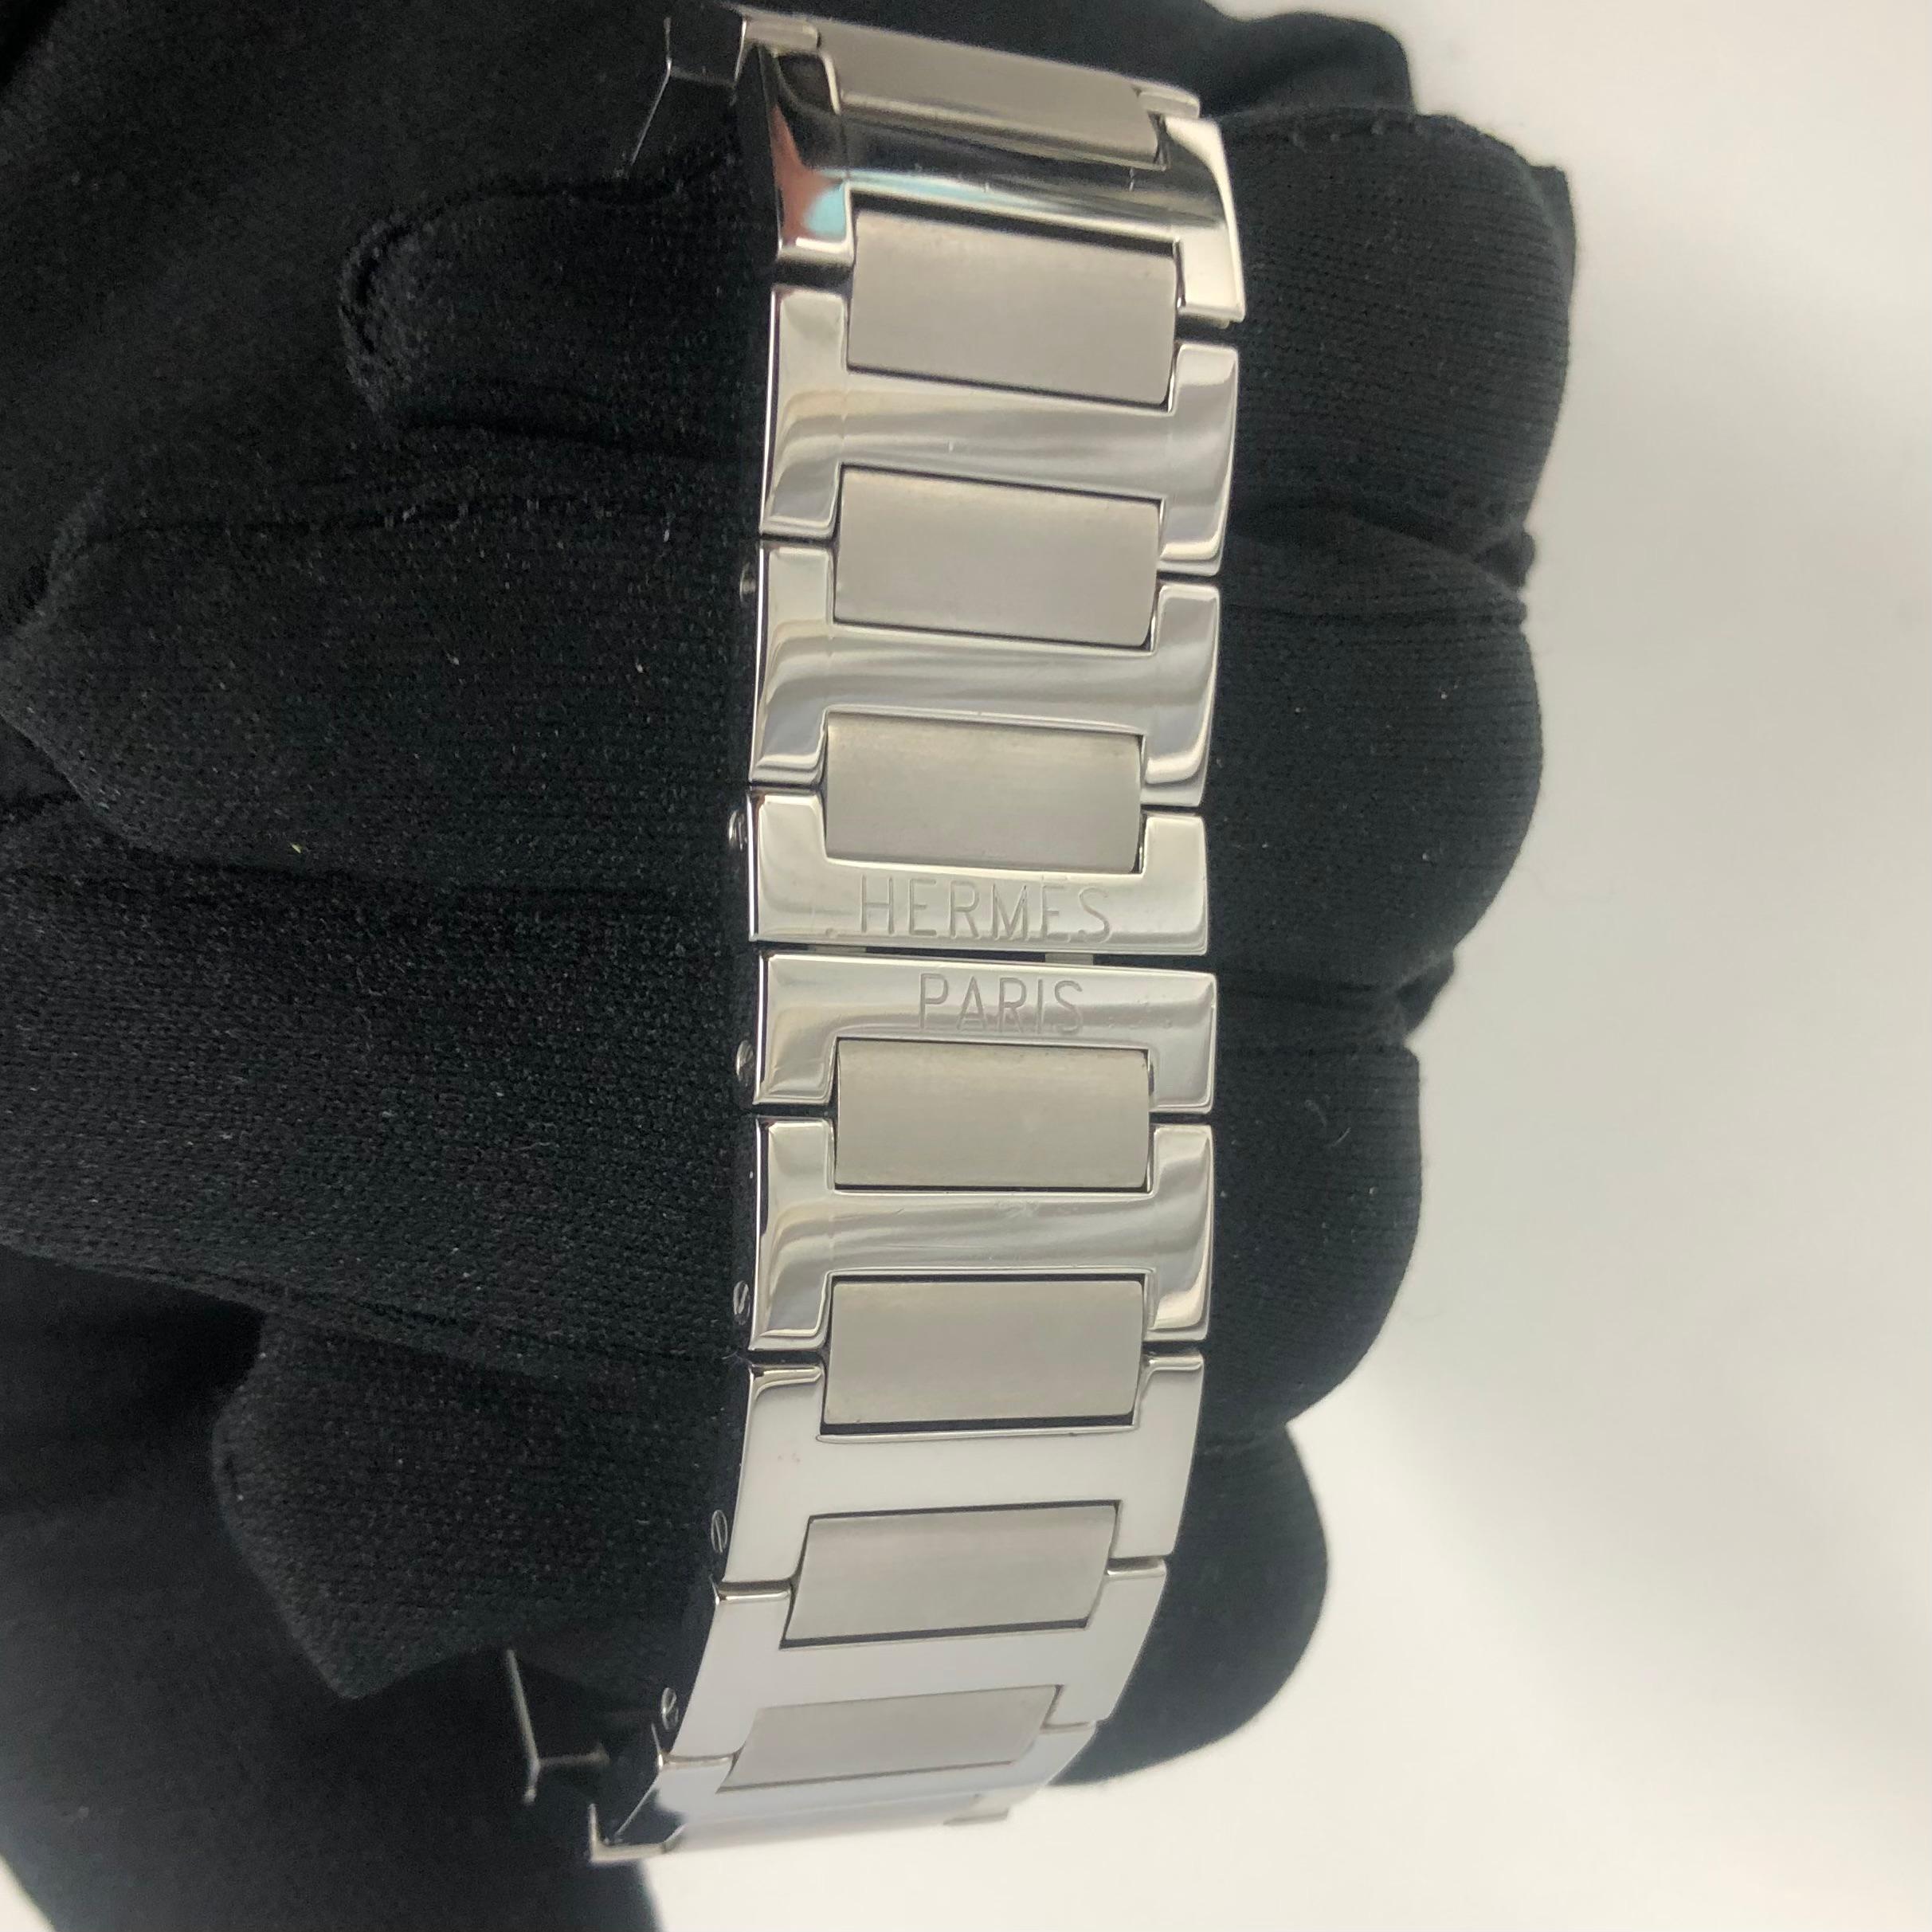 Hermes N01710 Watch.

This timepiece by Hermes has a classy look and feel. It has the perfect amount of weight to it with a 36mm case size. It’s online for $2,400.

The Hermes Paris logo on the case adds to this timepiece class.

This Rare timepiece